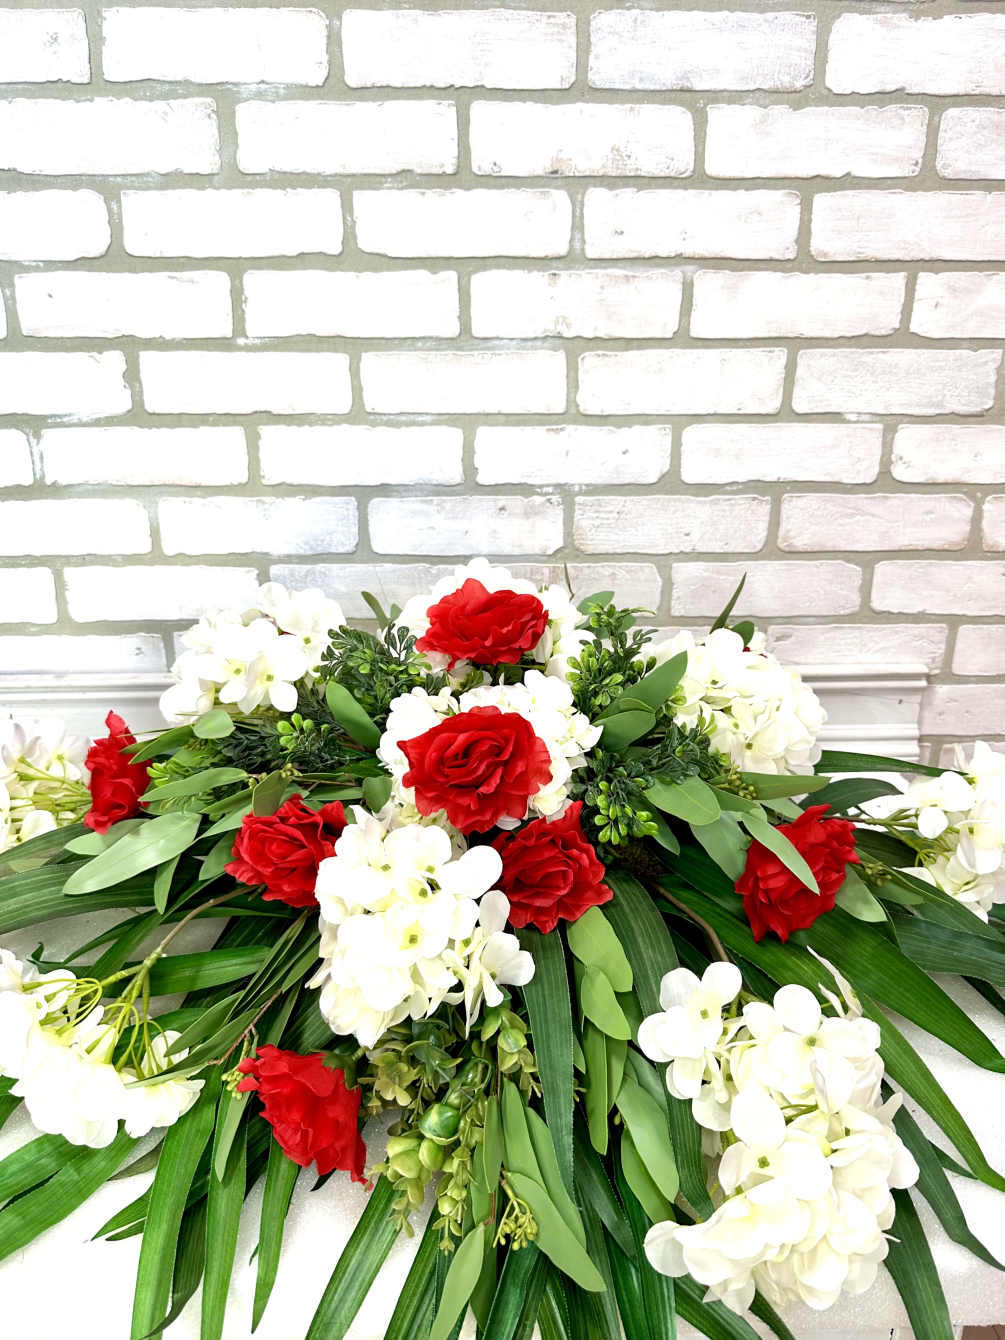 An artificial casket saddle arranged with roses, hydrangeas, and eucalyptus 